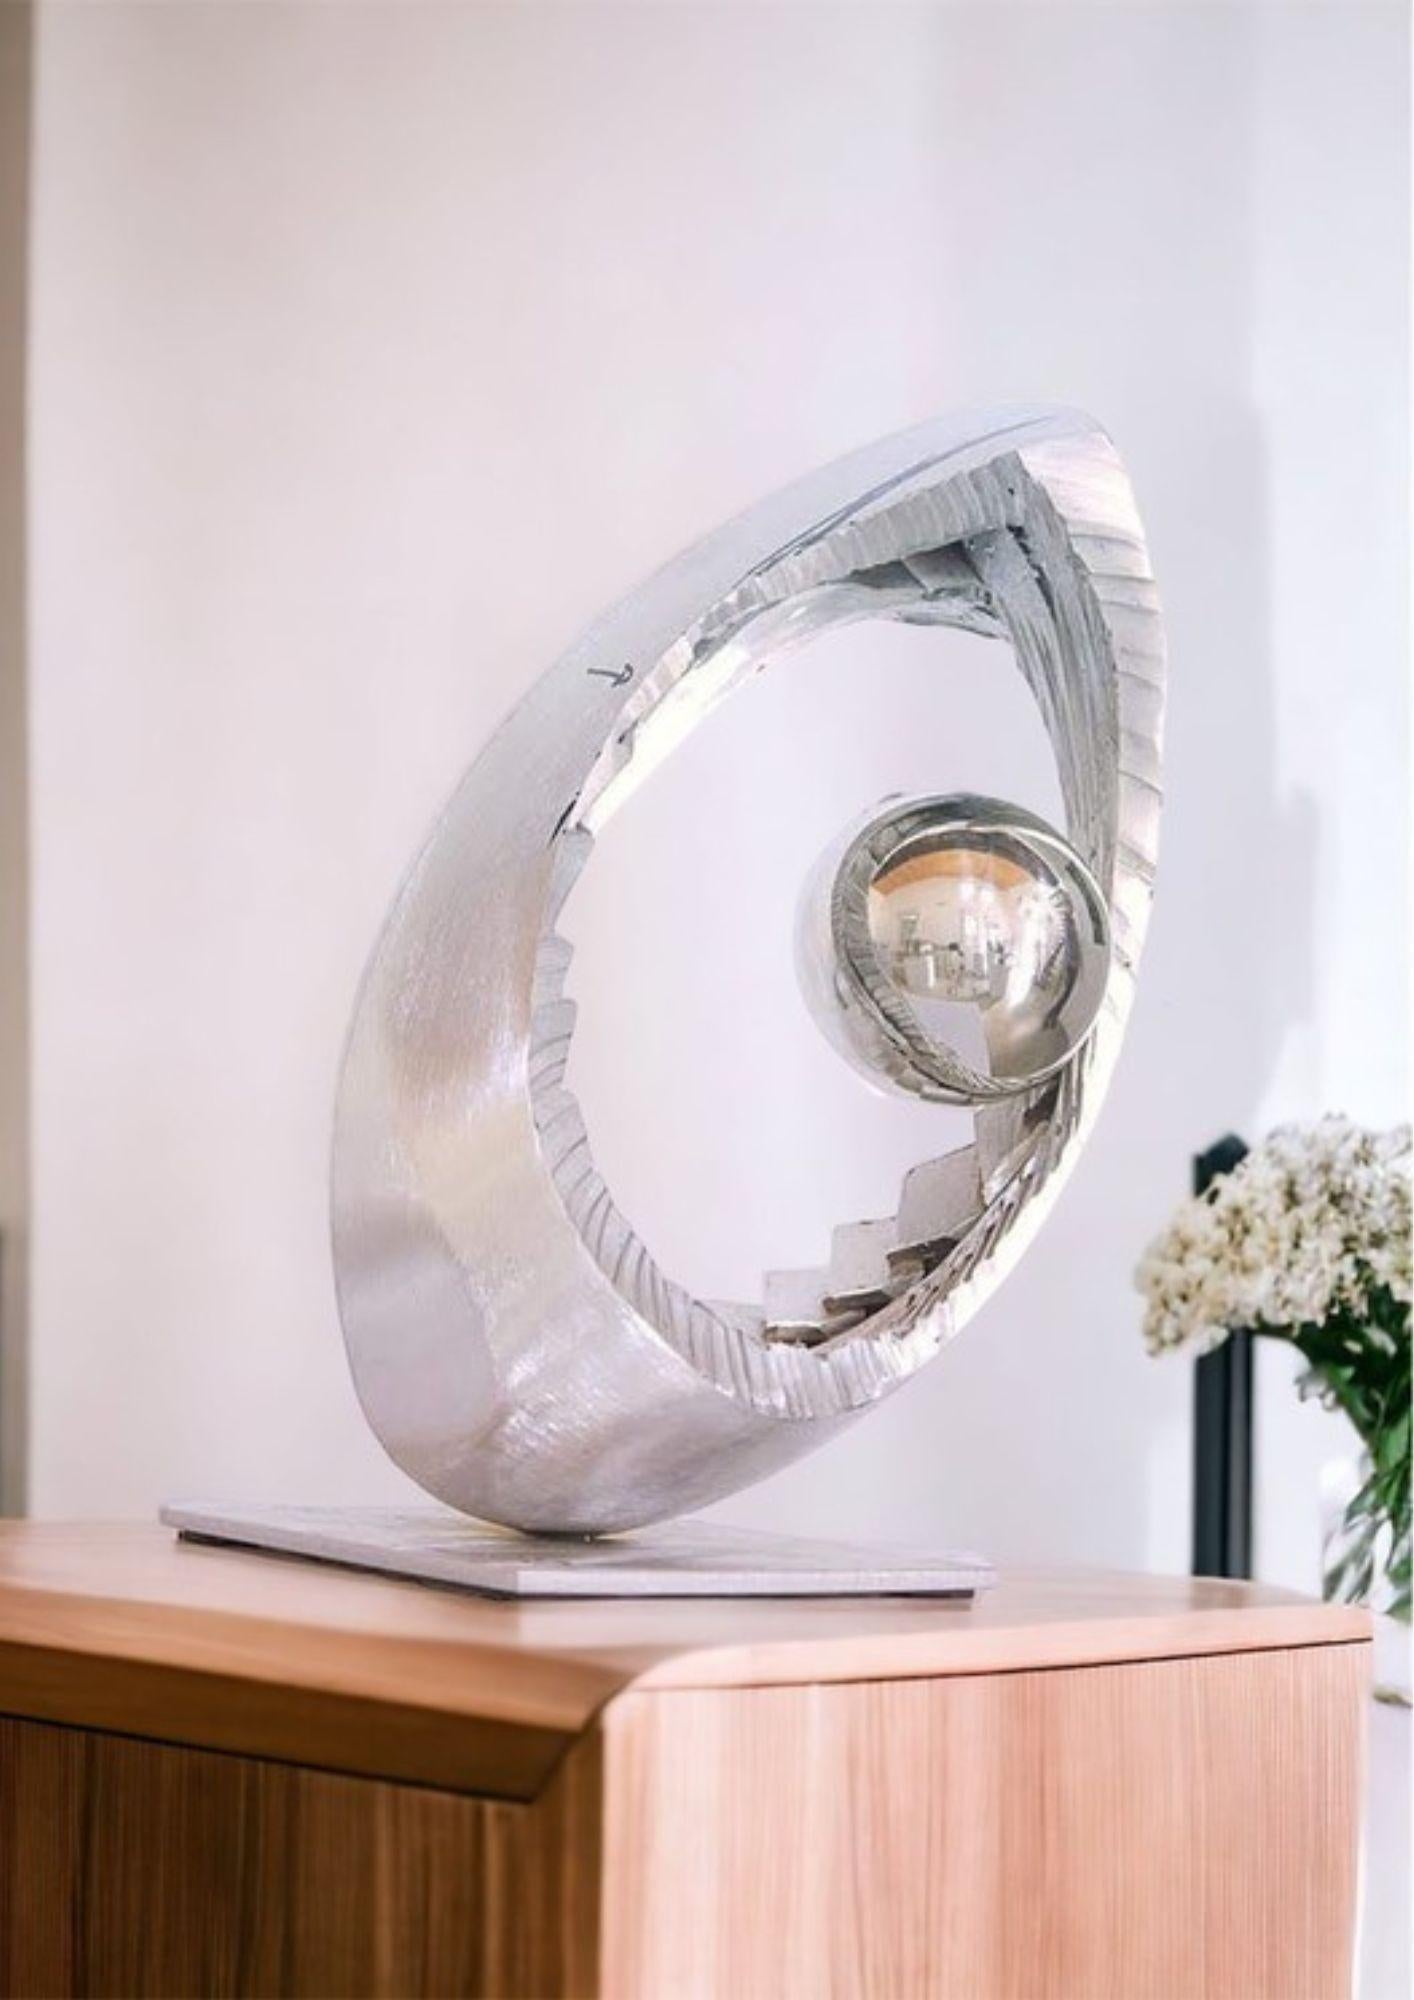 The Mobius 4 sculpture is a work that explores the concepts of circulation, torsion and movement through the Möbius ring. The artist draws inspiration from this fascinating mathematical figure to give life to a sculpture that embodies the infinite